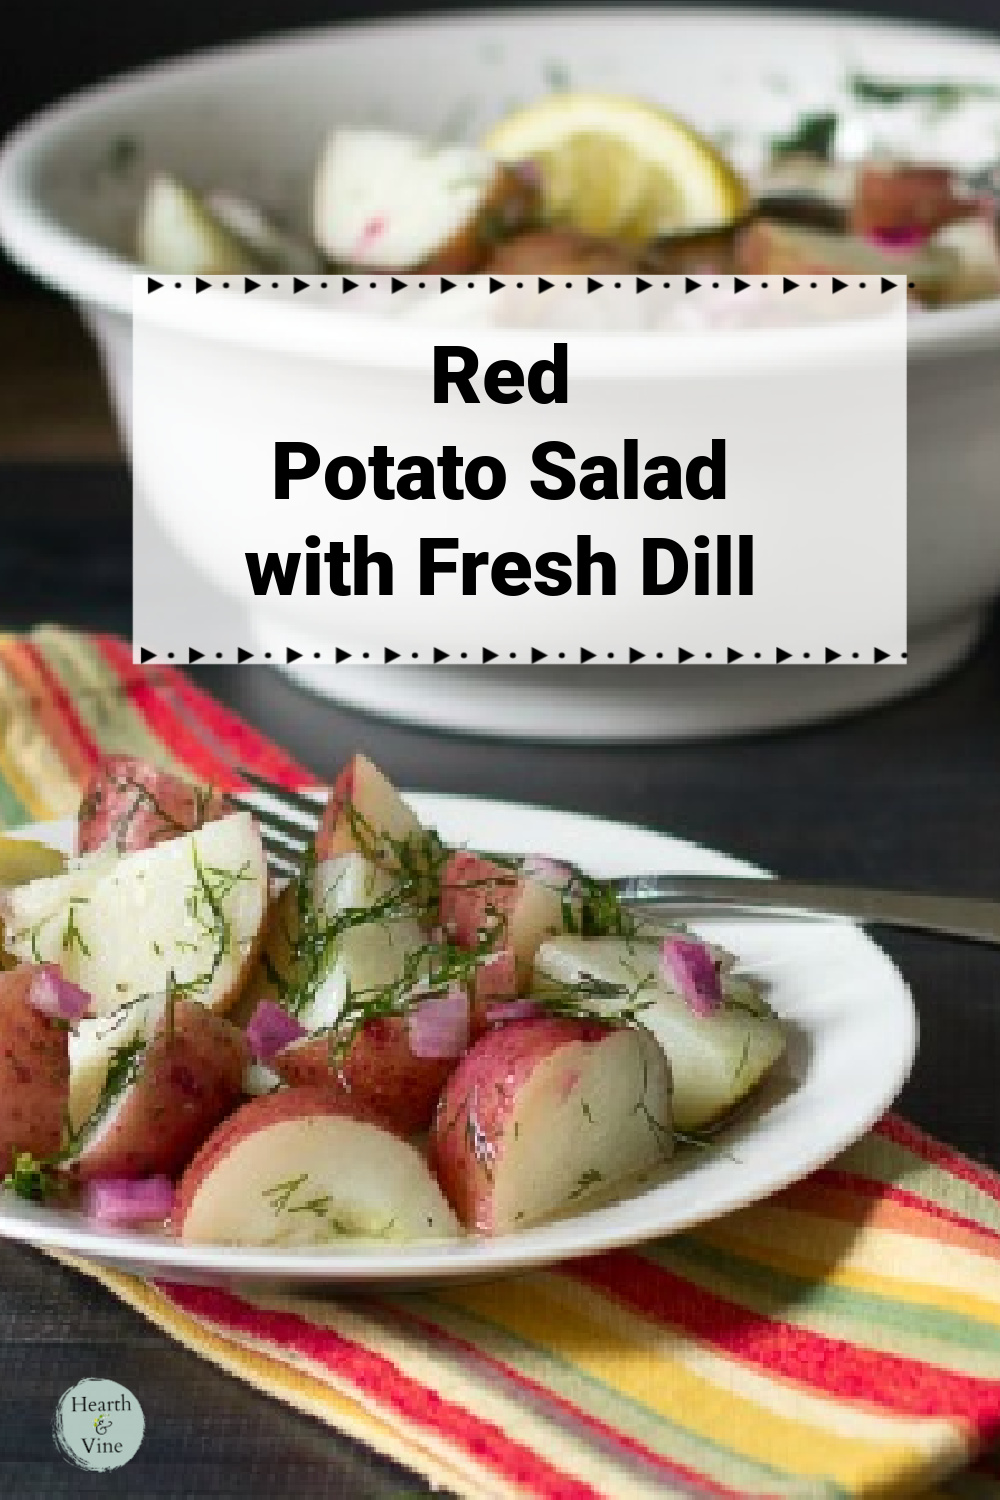 A serving plate of red potato salad with dill and red onions.